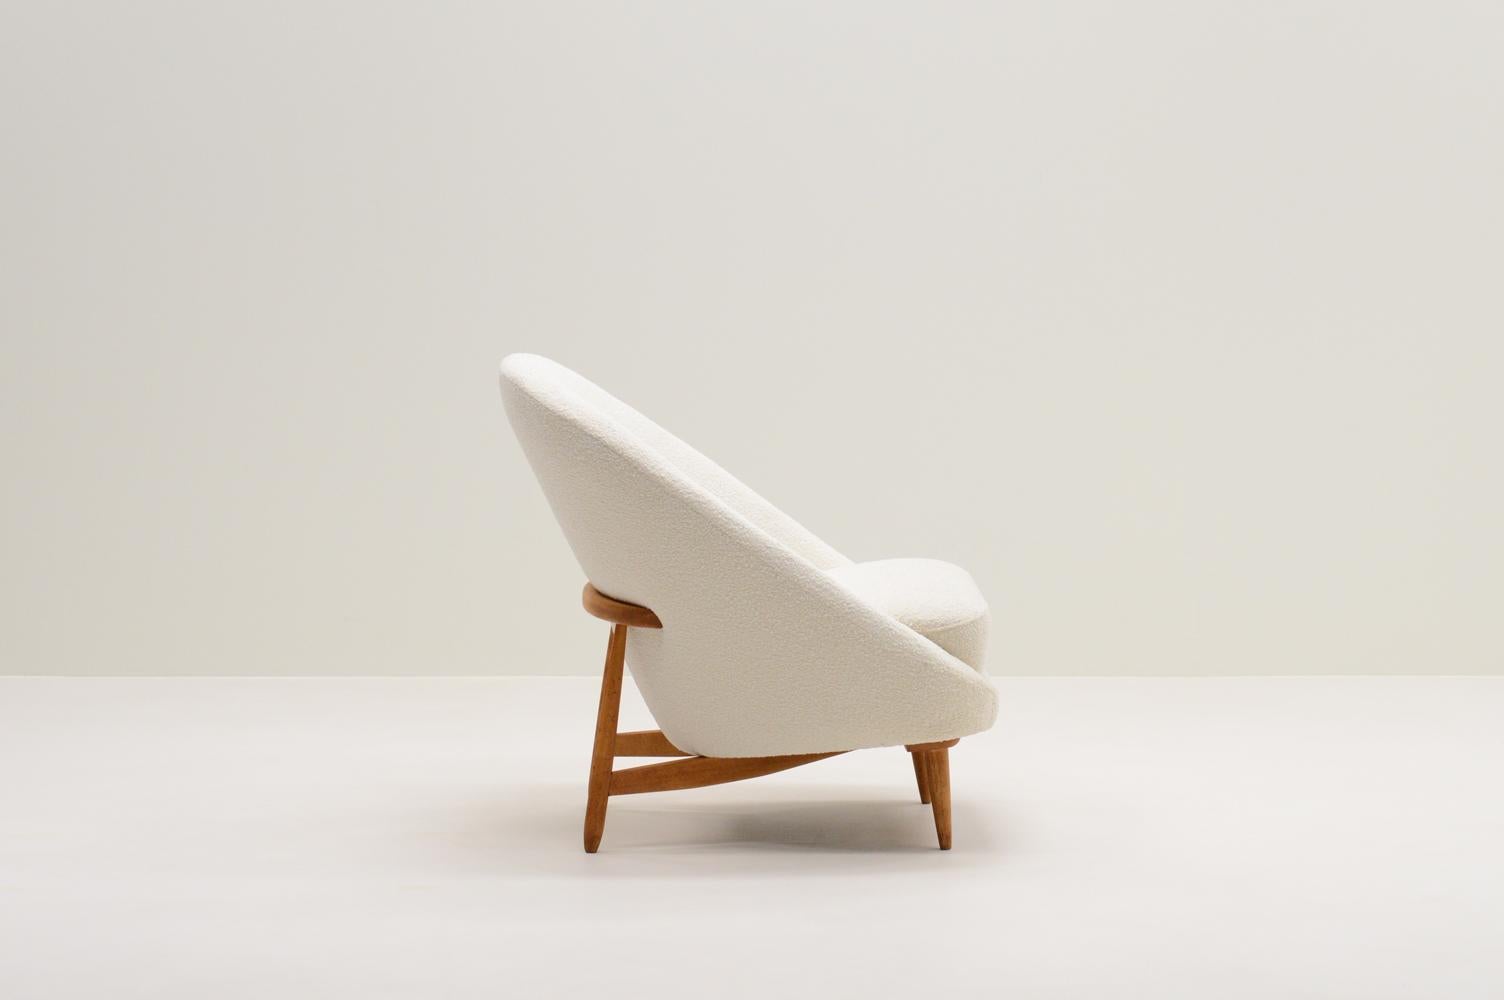 Model 115 chair by Theo Ruth for Artifort, 1950s the Netherlands. This chair was made in 1958 and has the original wooden frame, later Artifort also made a version with a metal frame. Theo Ruth (1915- 1971) was one of the pioneer designers of